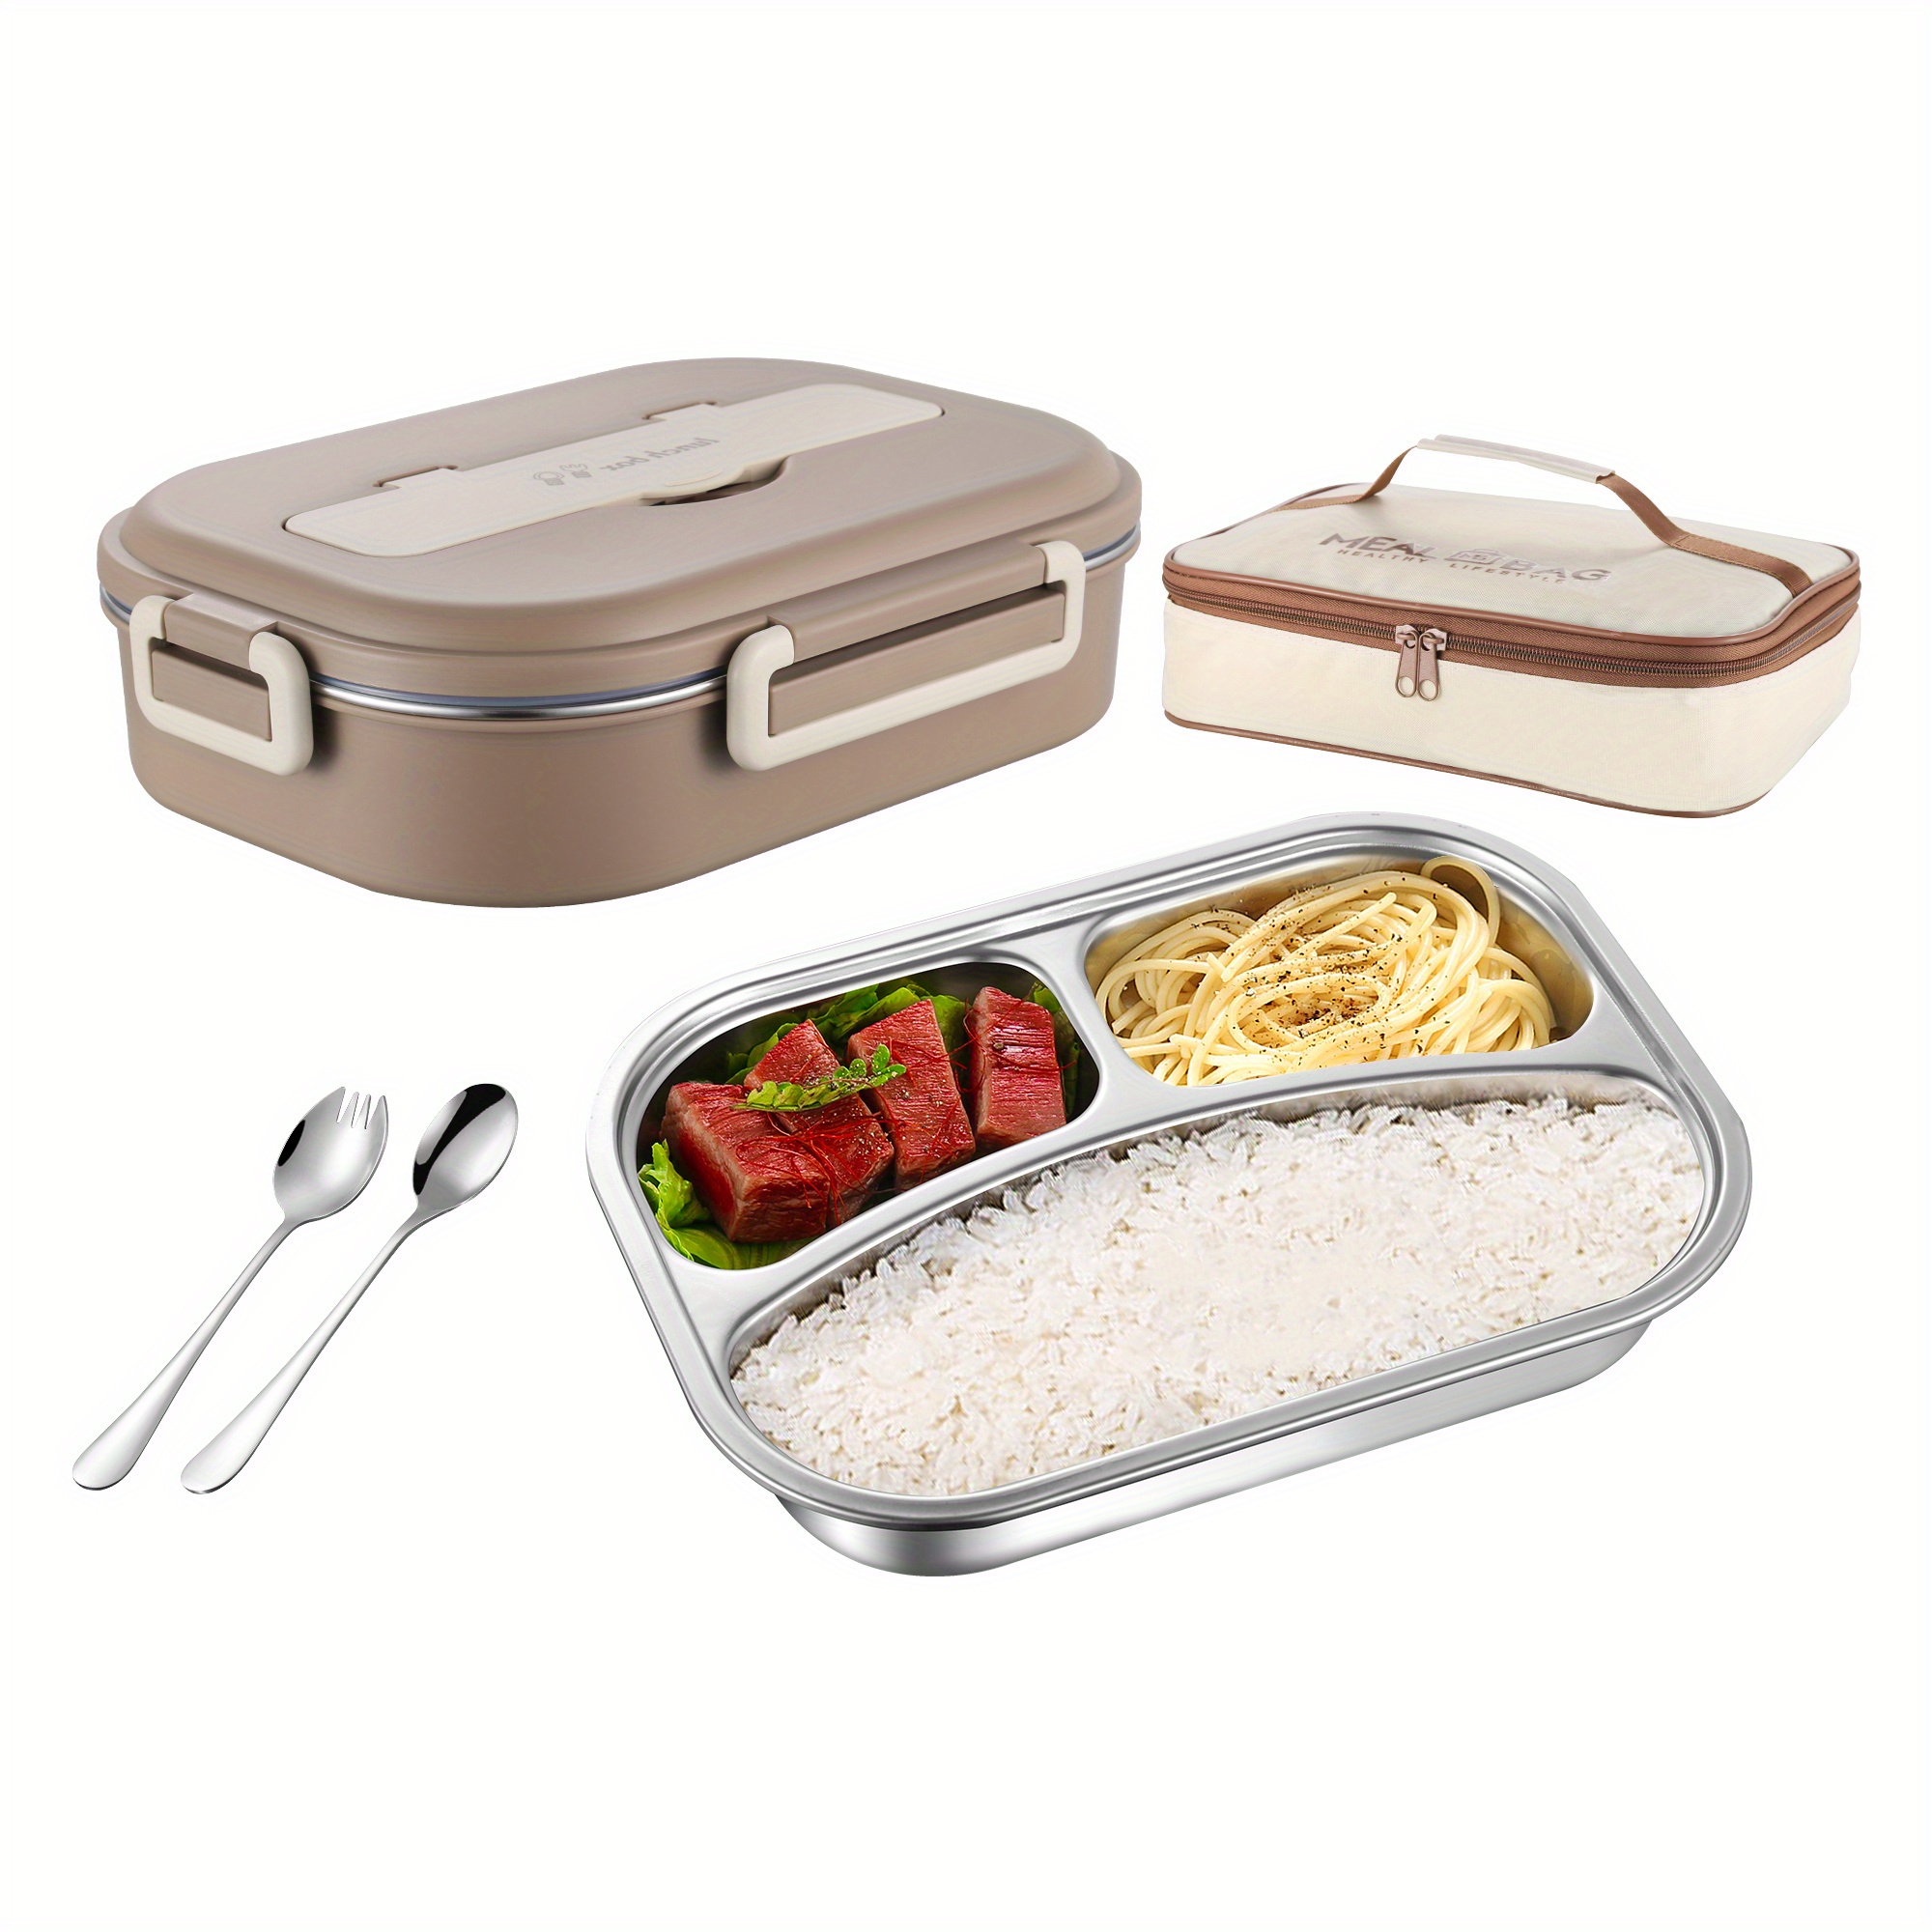  Thousanday Lunch Box for Kids & Adults, Bento box with